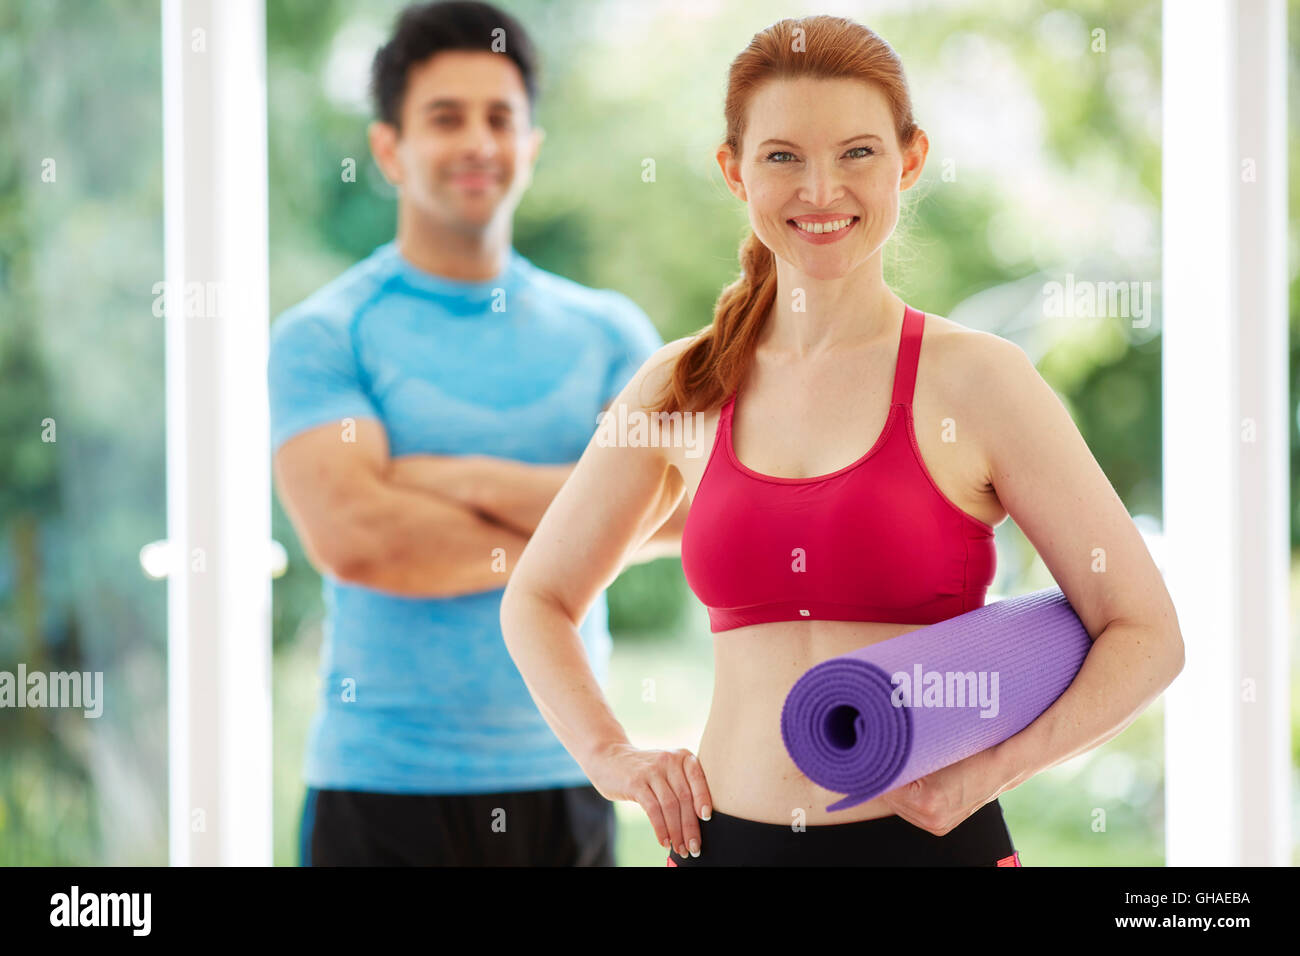 Couple stood together in gym Stock Photo